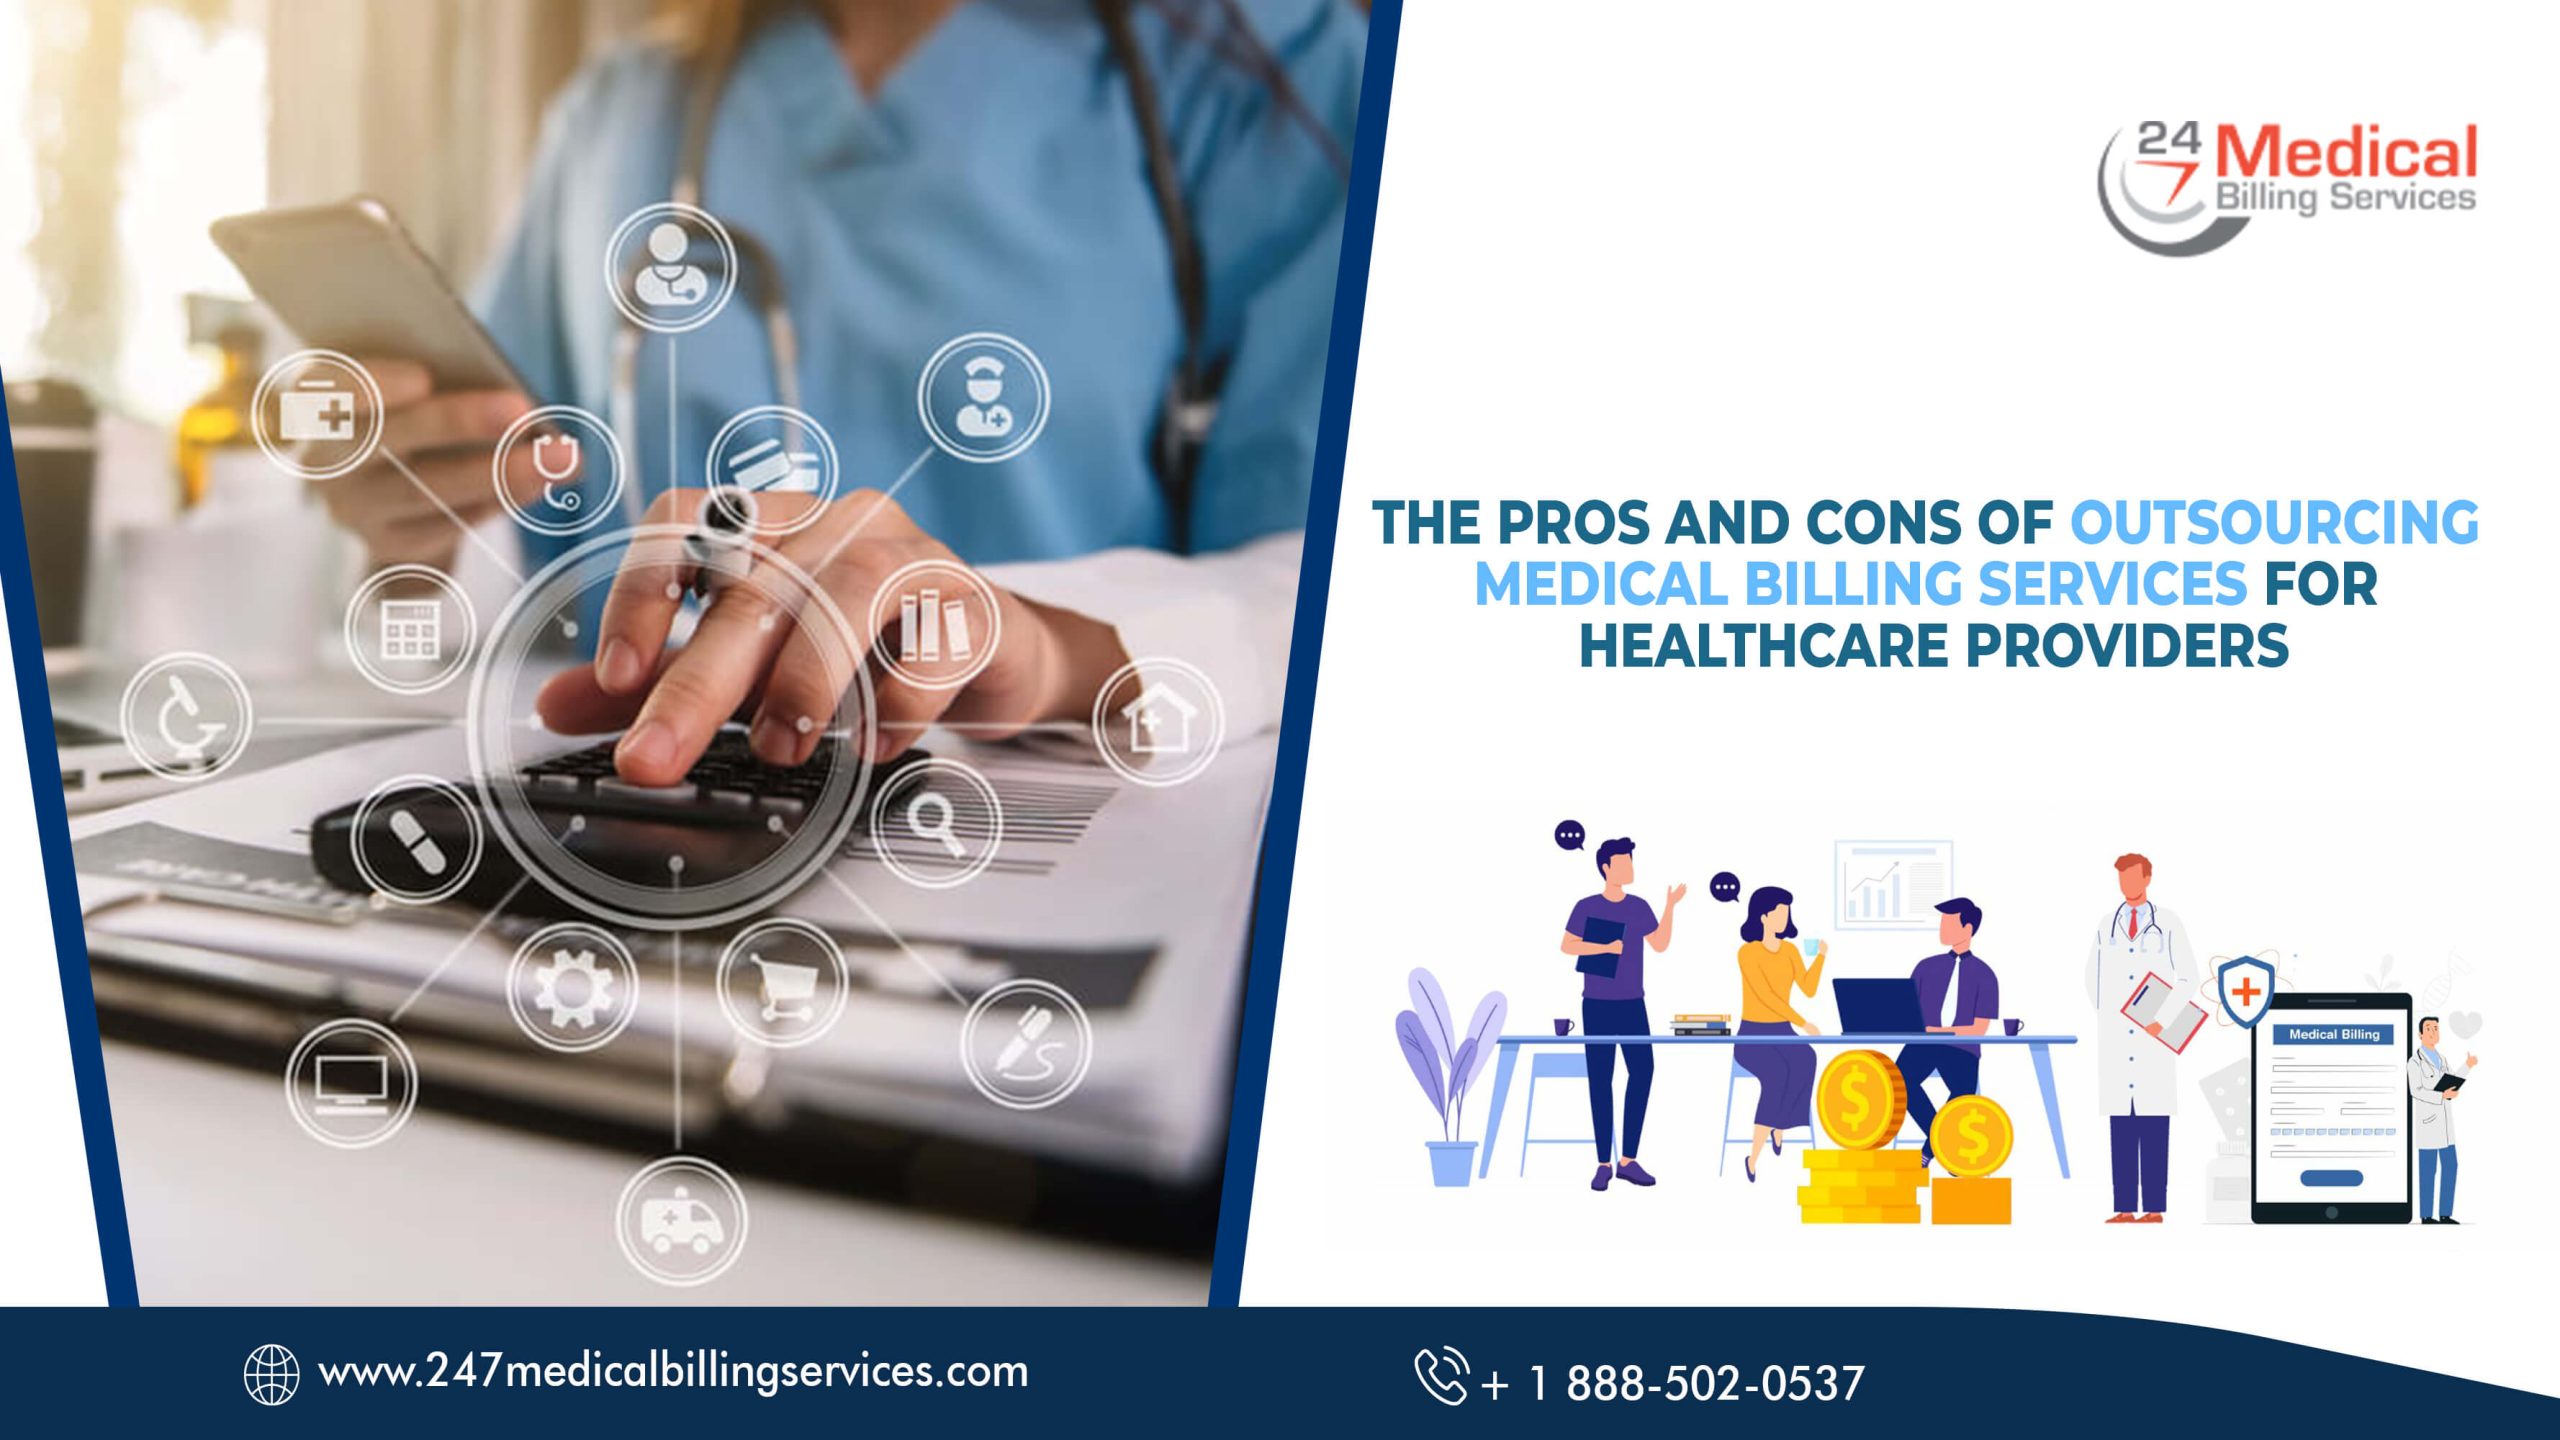  The Pros and Cons of Outsourcing Medical Billing Services for Healthcare Providers